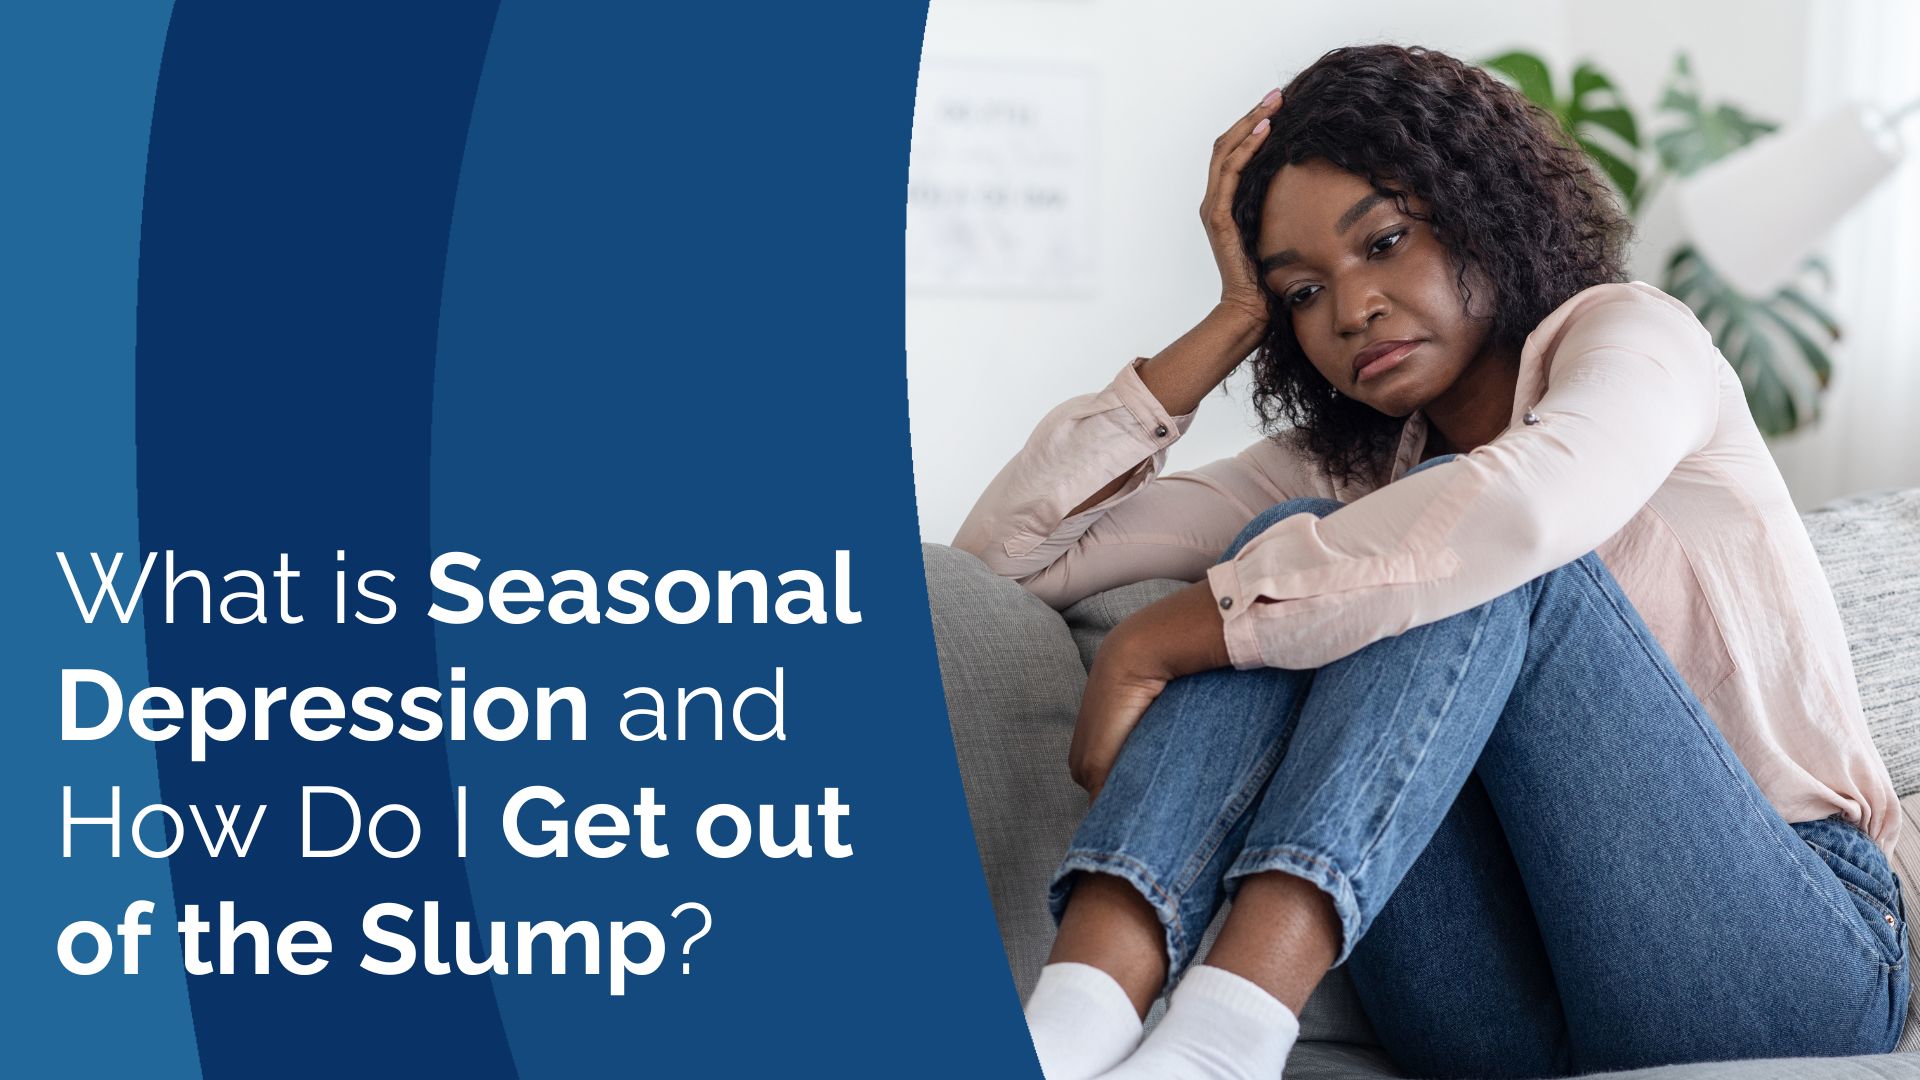 What is Seasonal Depression and How Do I Get out of the Slump